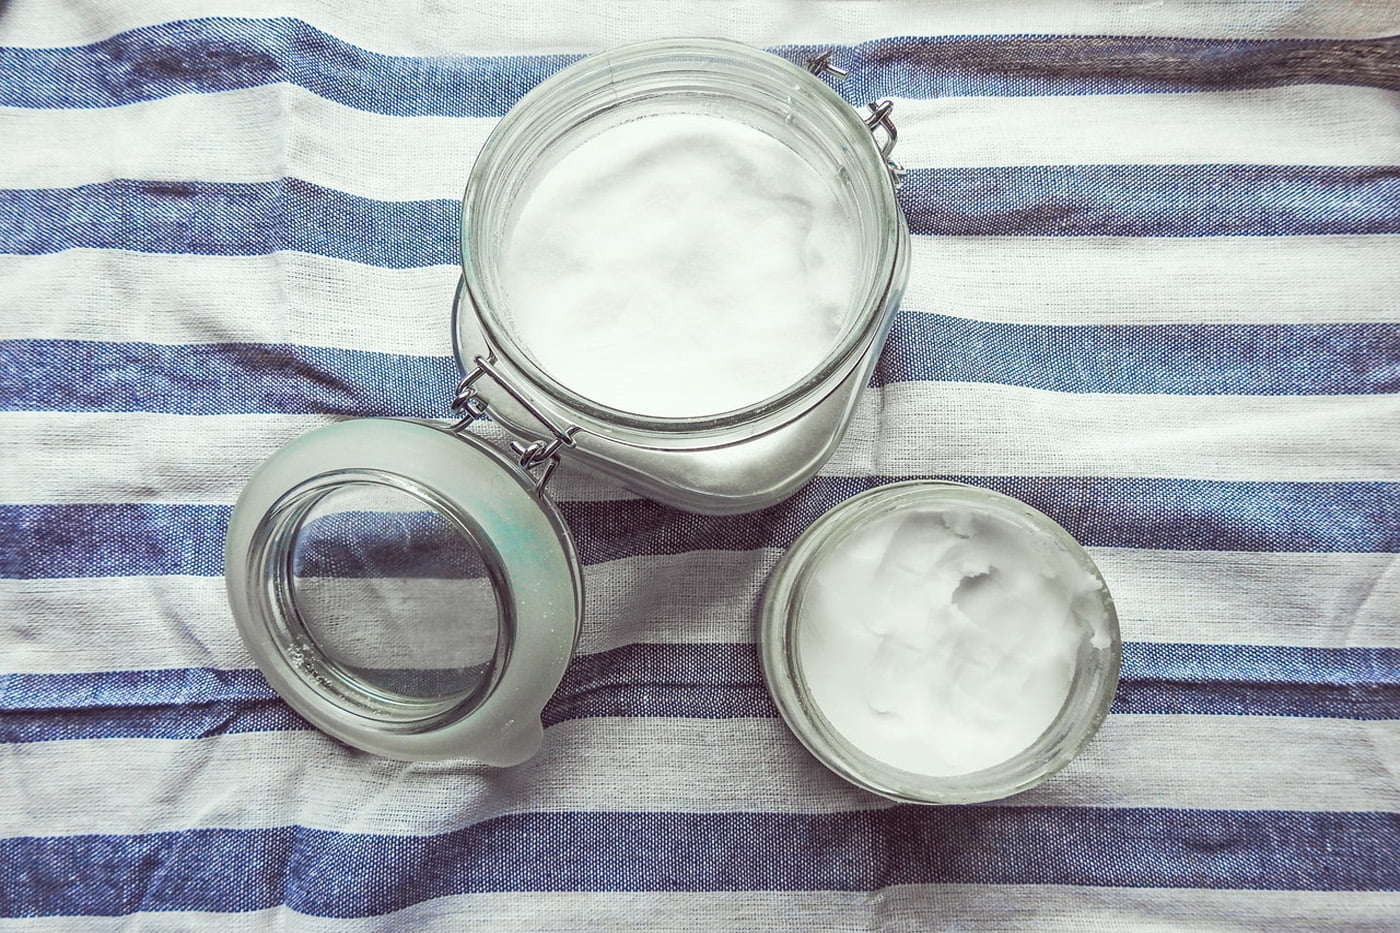 Coconut Oil Might Actually Be Pretty Bad For You